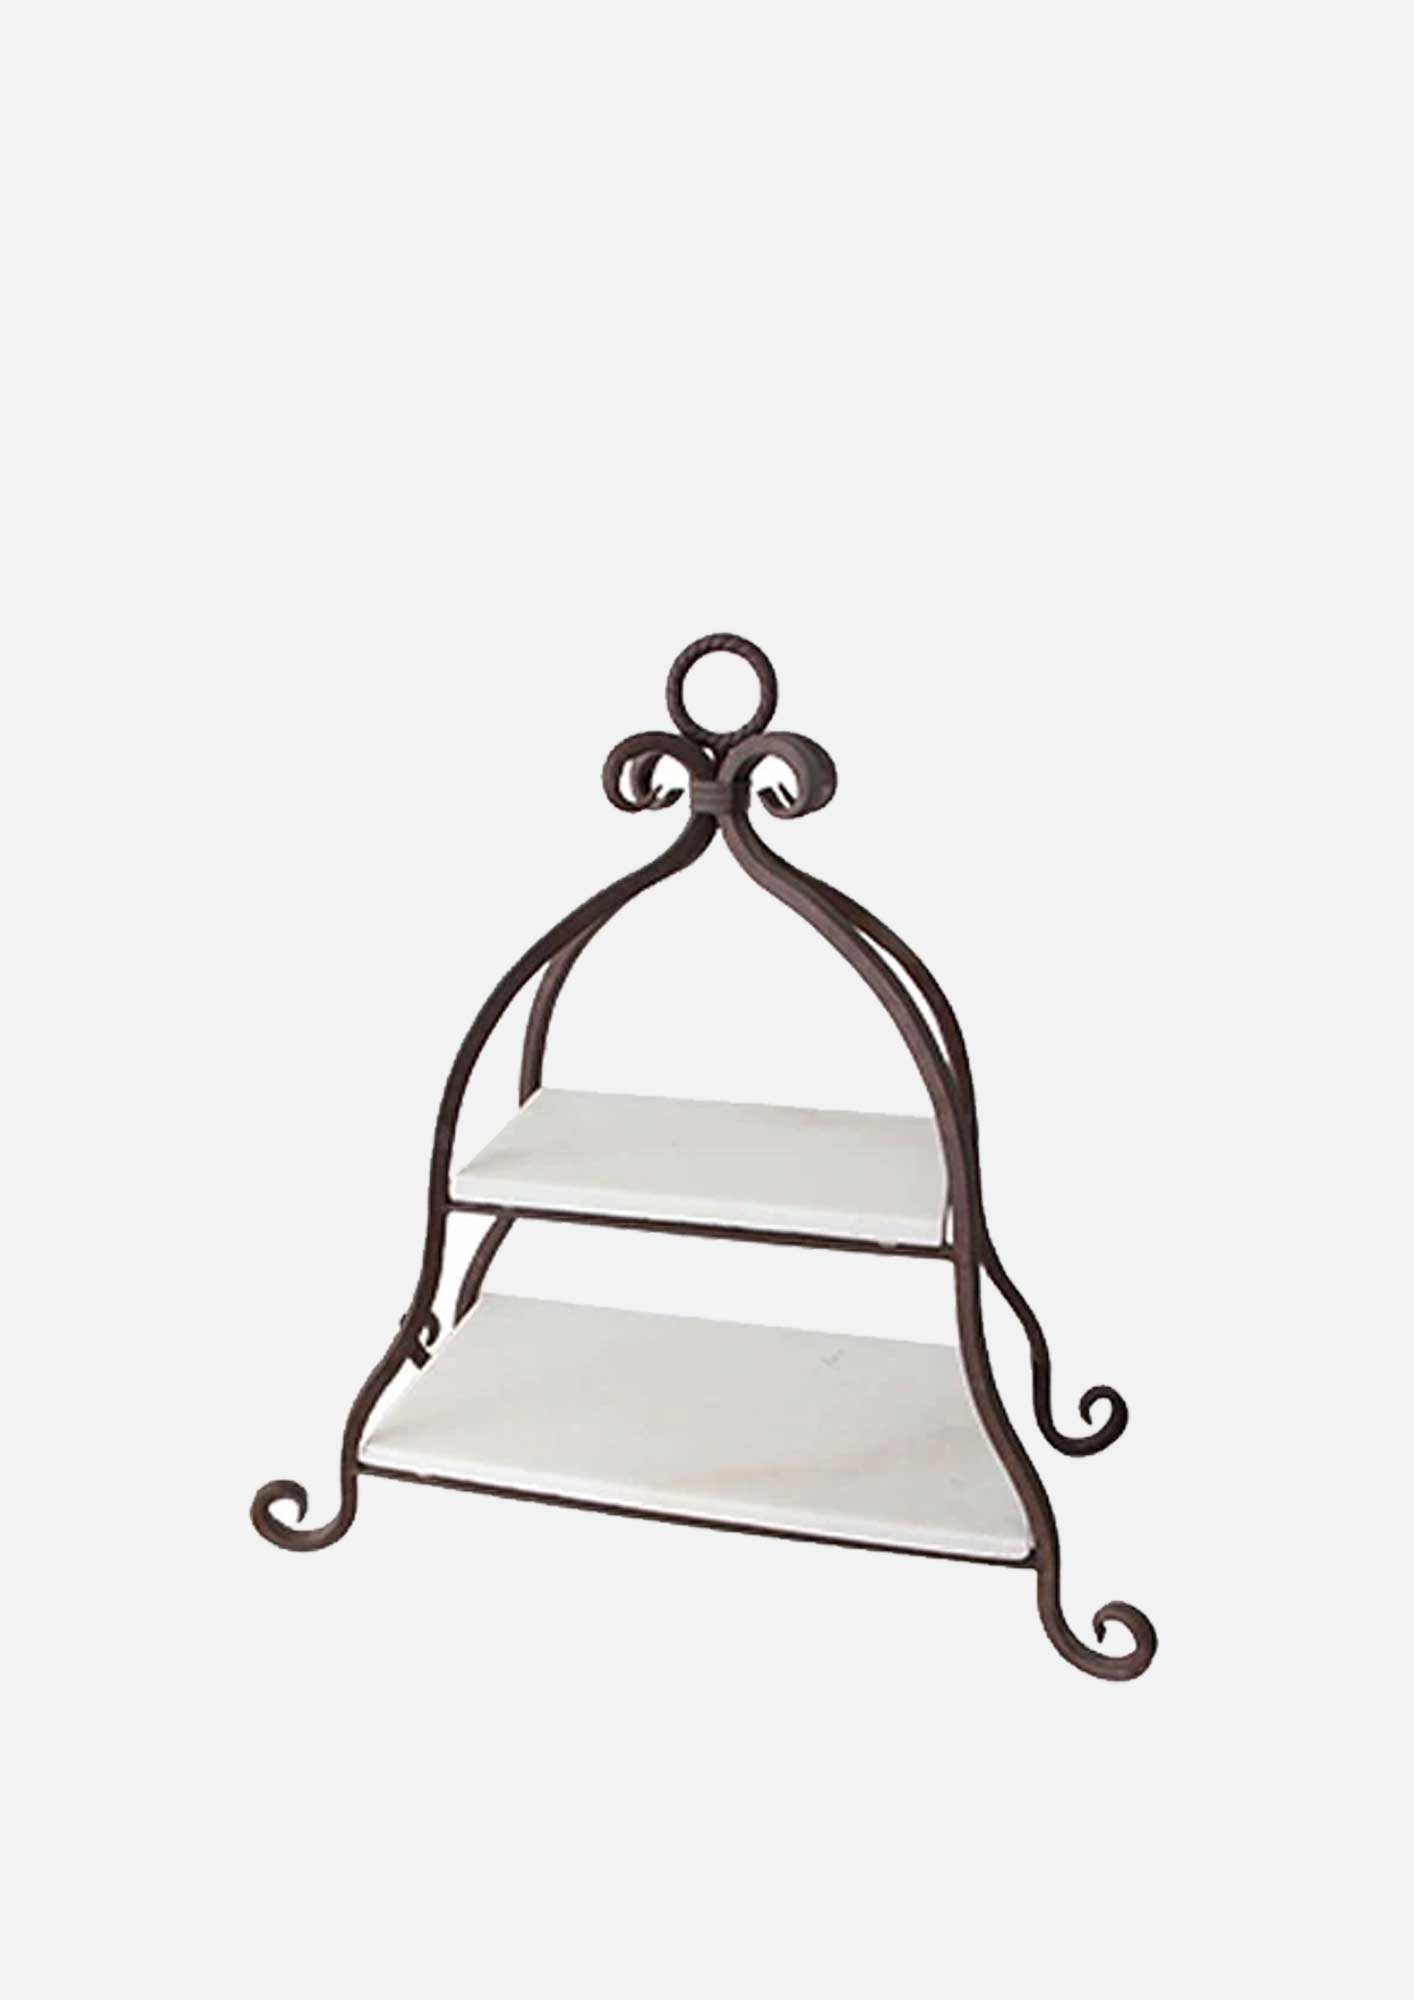 2 Tier Marble Cake Stand